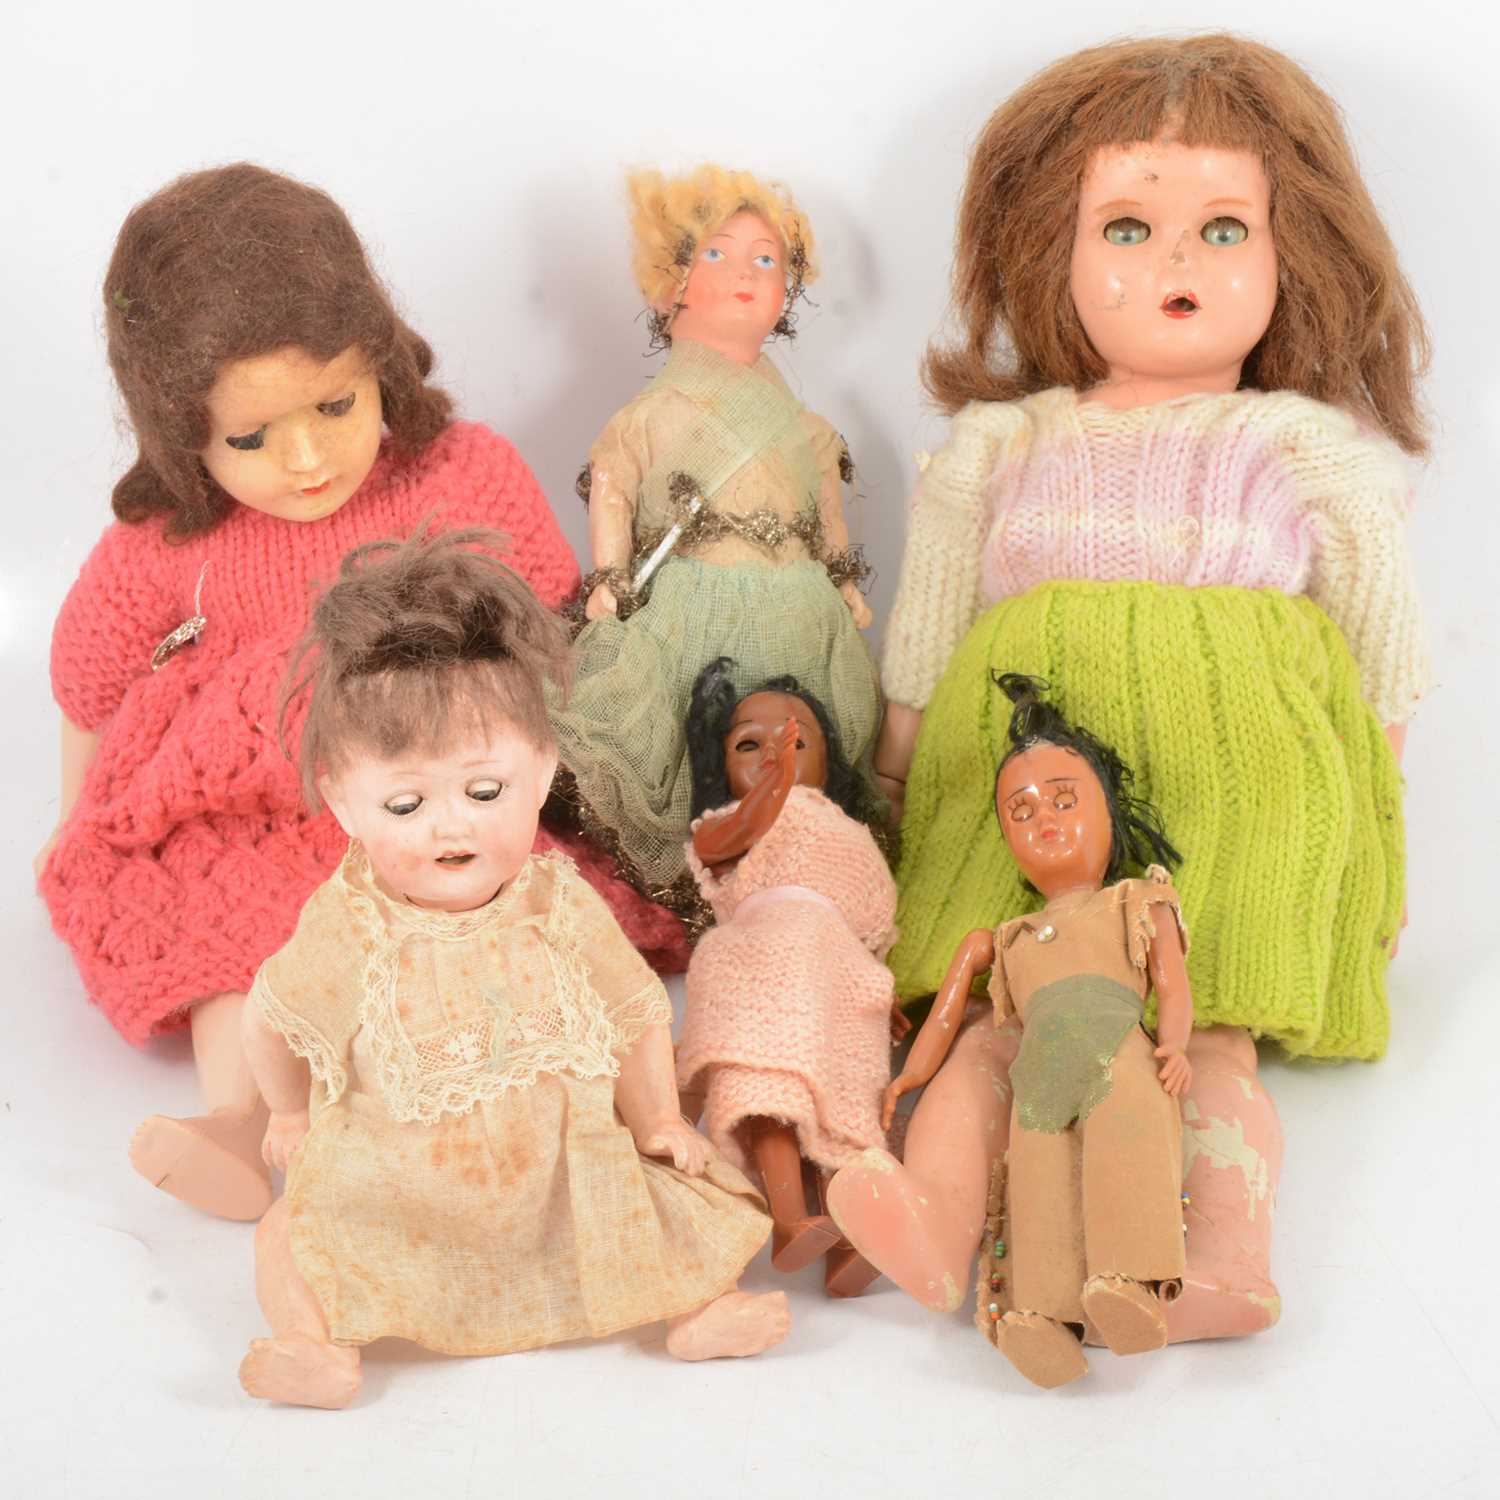 Lot 198 - Heubach Koppelsdorf bisque head baby doll and others.